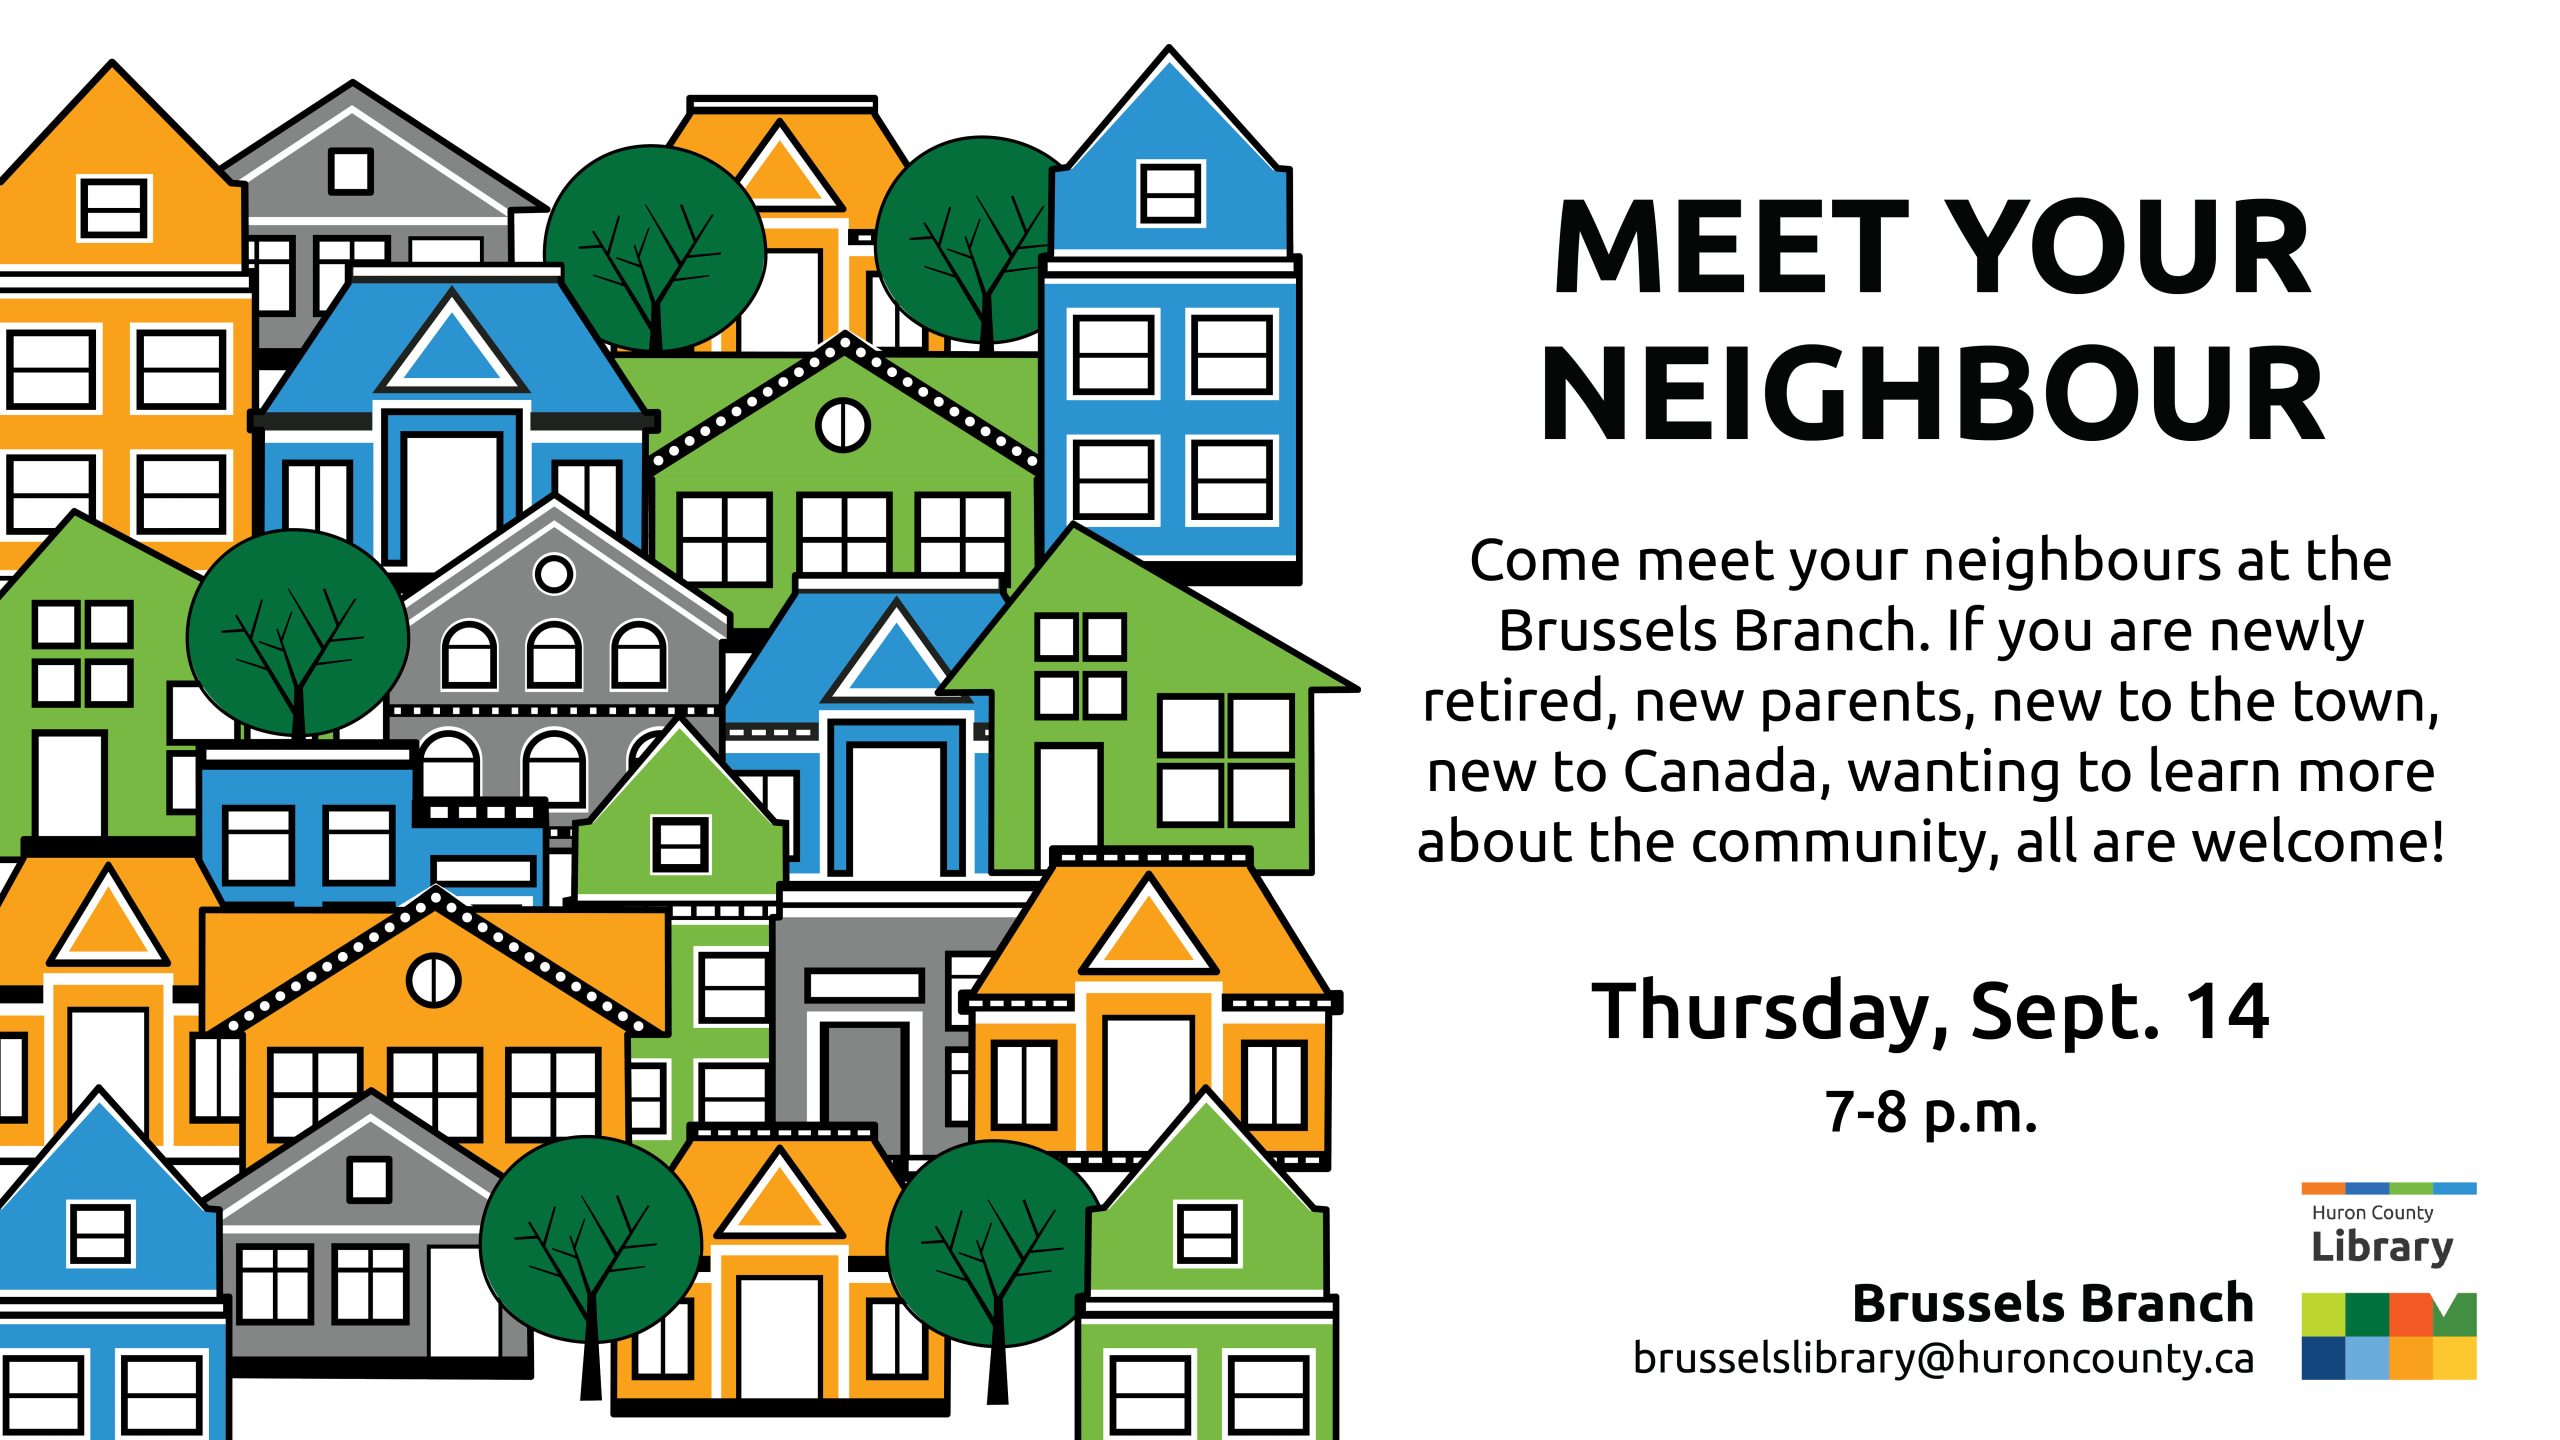 Illustration of a neighbourhood of homes with text promoting Meet Your Neighbour at Brussels Branch